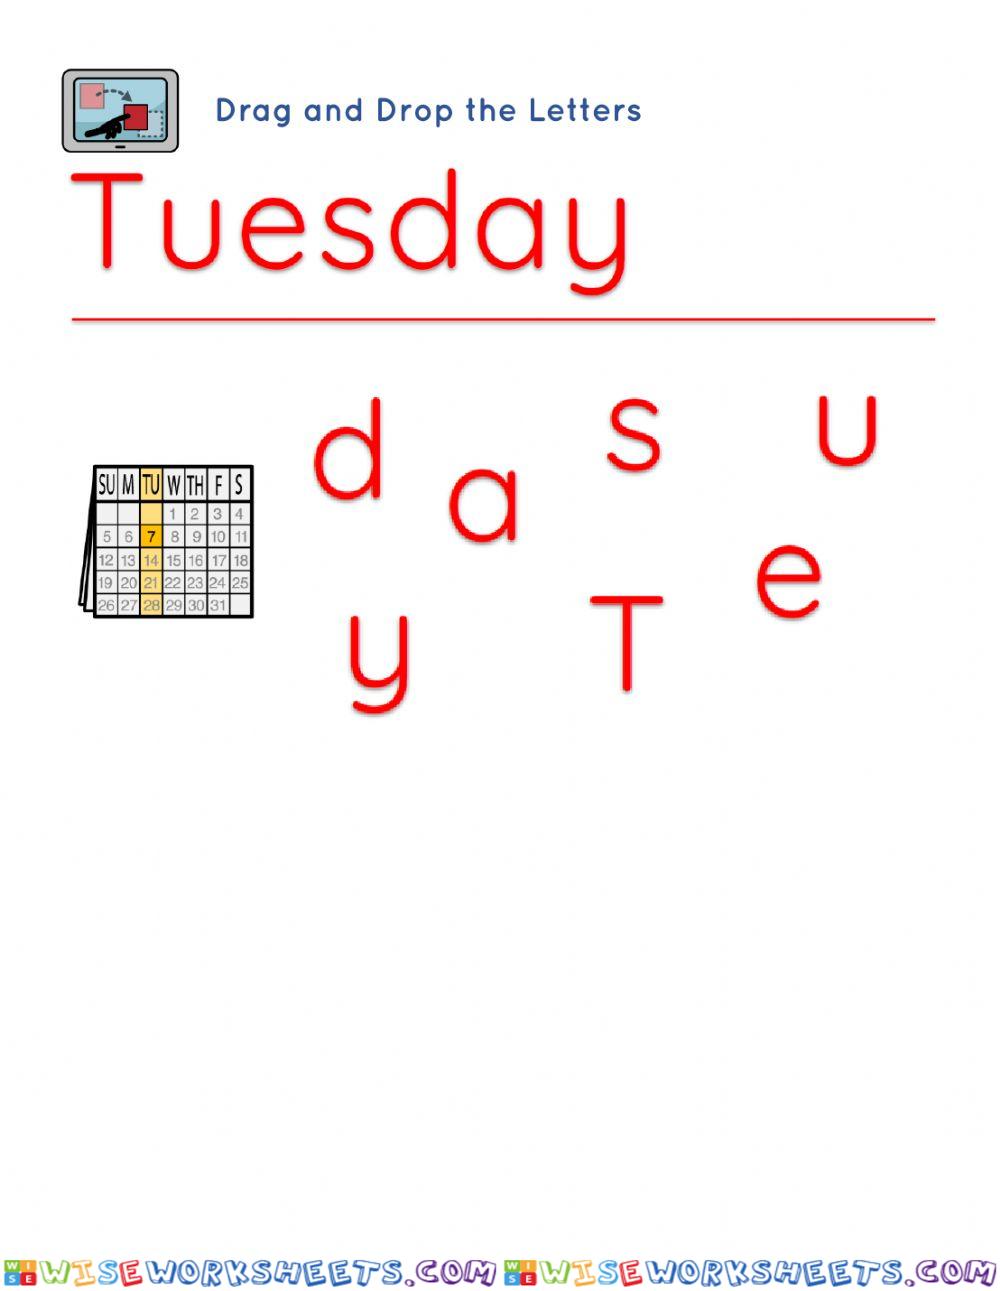 Day . Tuesday